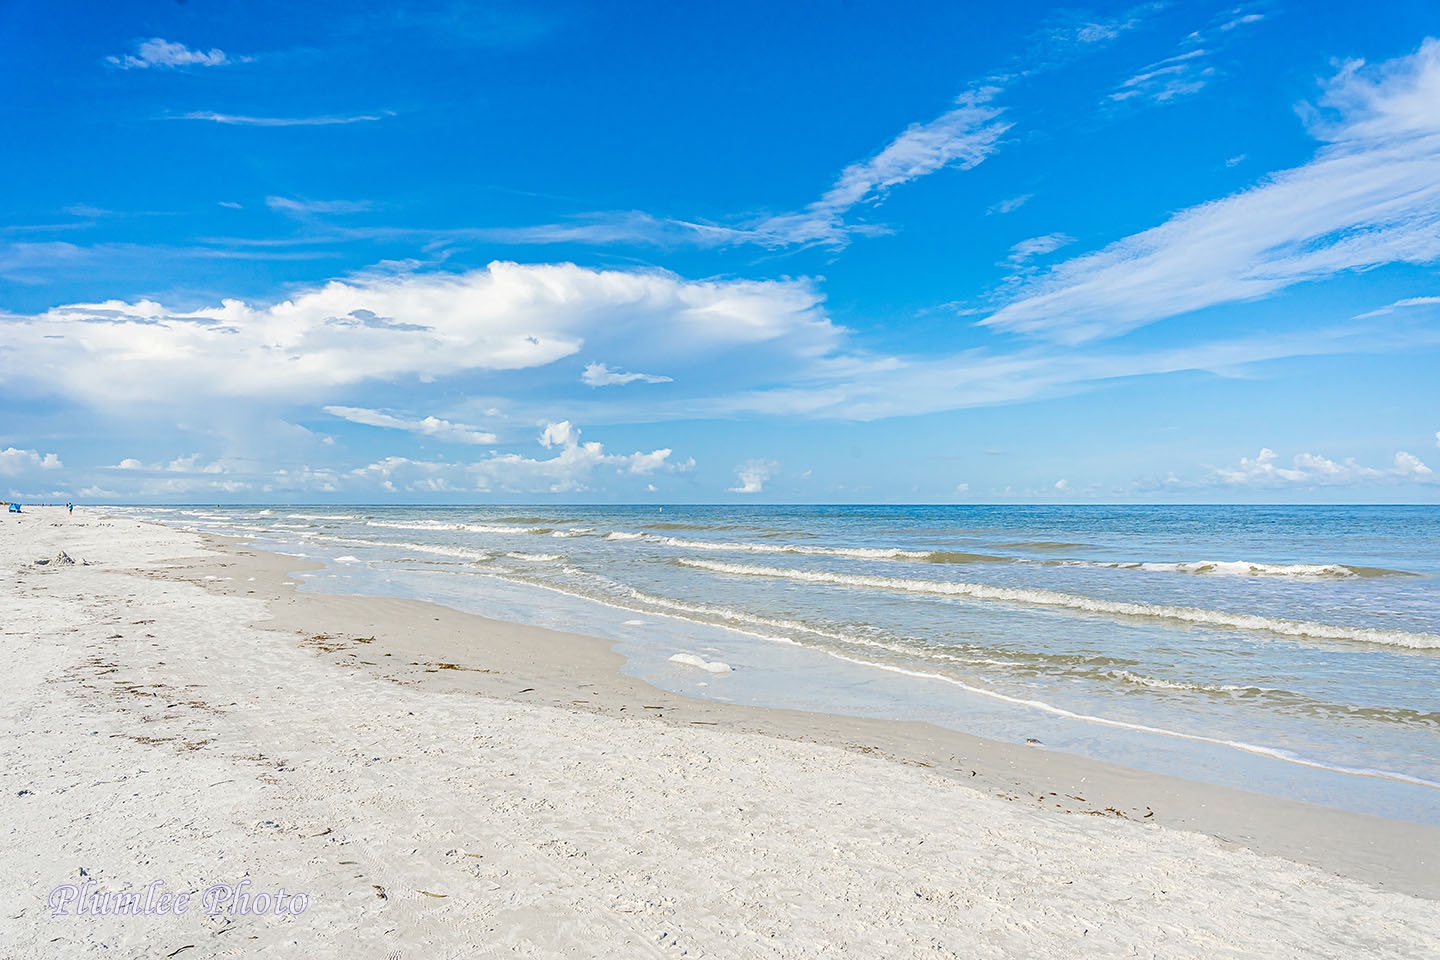 The sugary white sands of the Gulf beach